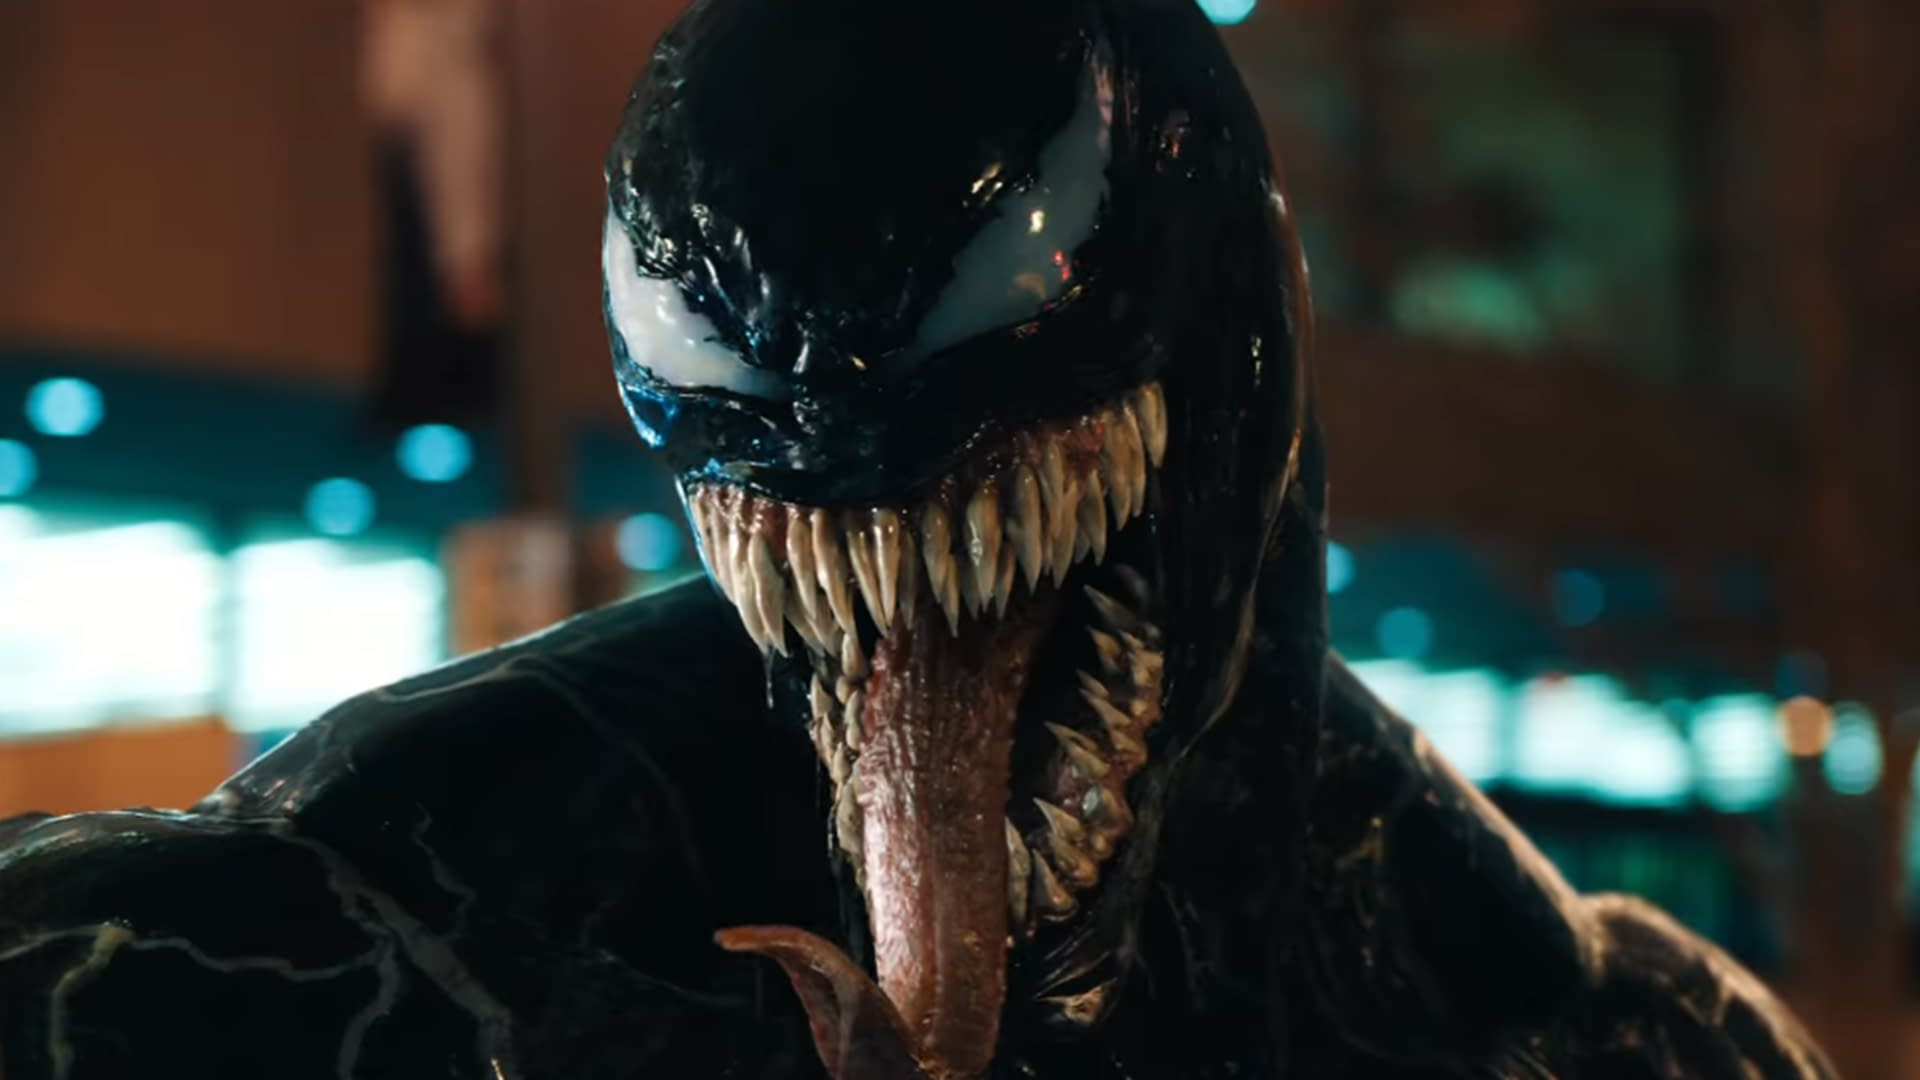 Venom Director Teases an Unrated Version and Horror Influences